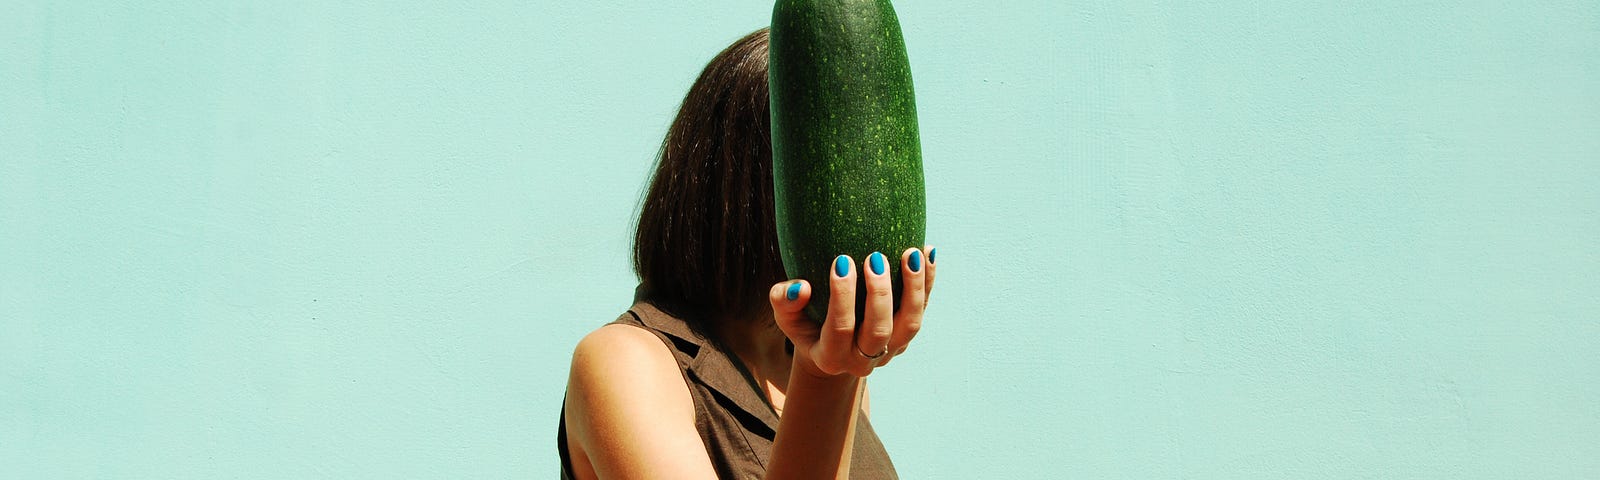 A photo of a woman holding a large cucumber that covers her face, against a mint/teal background.